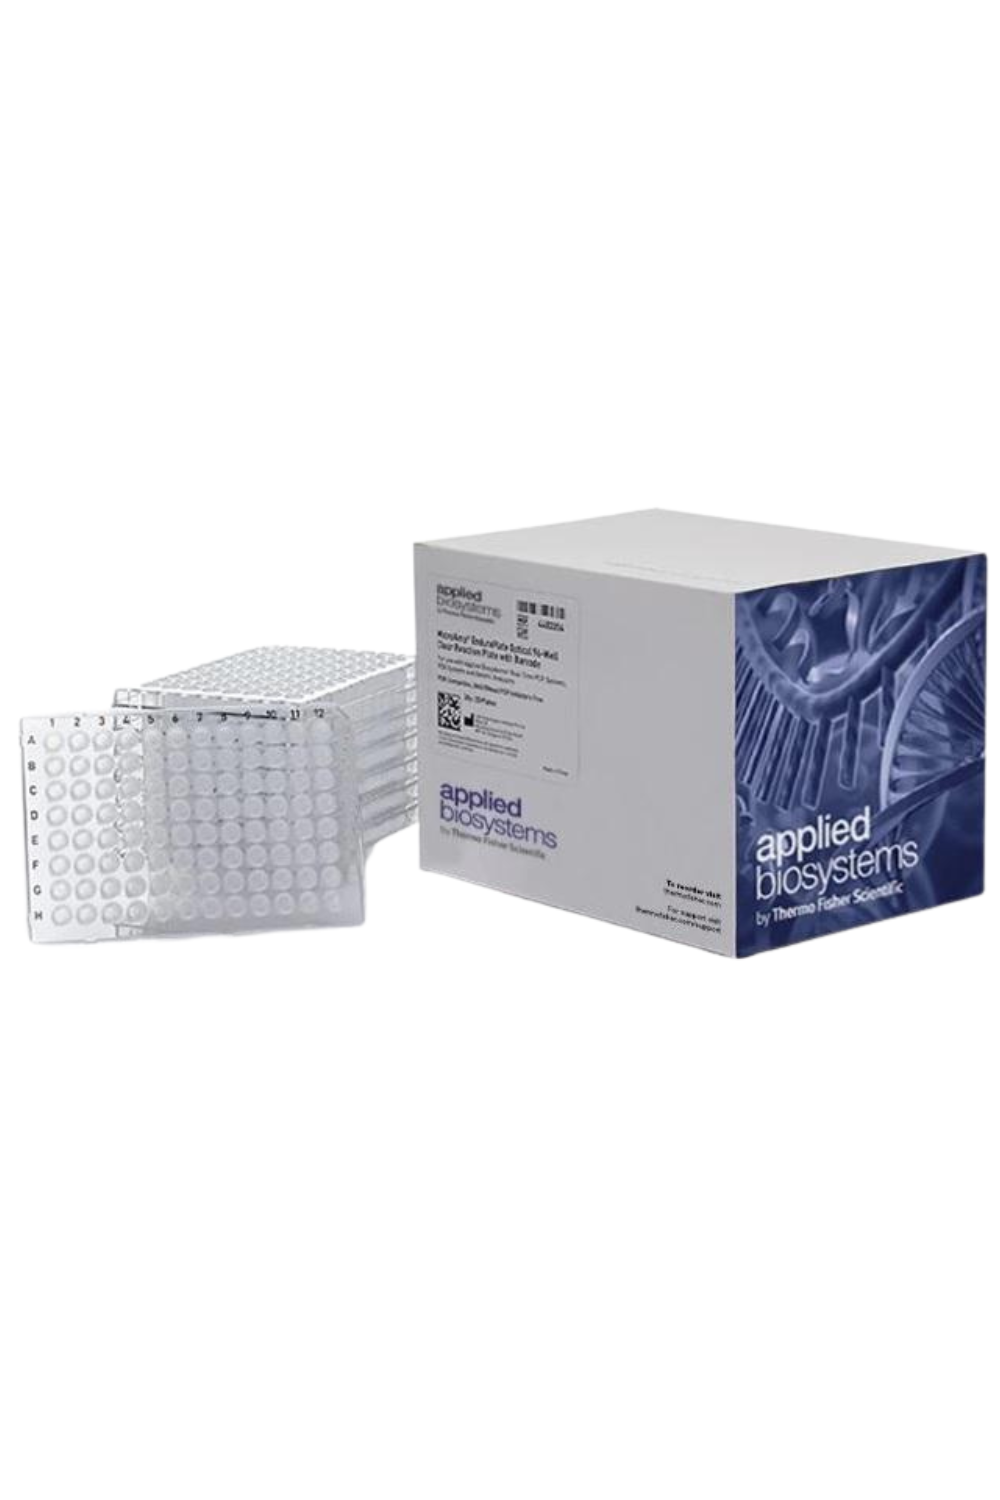 MicroAmp™ EnduraPlate™ Optical 96-Well Clear Reaction Plates. Overpack of 32 Packs of 20 (A36924)